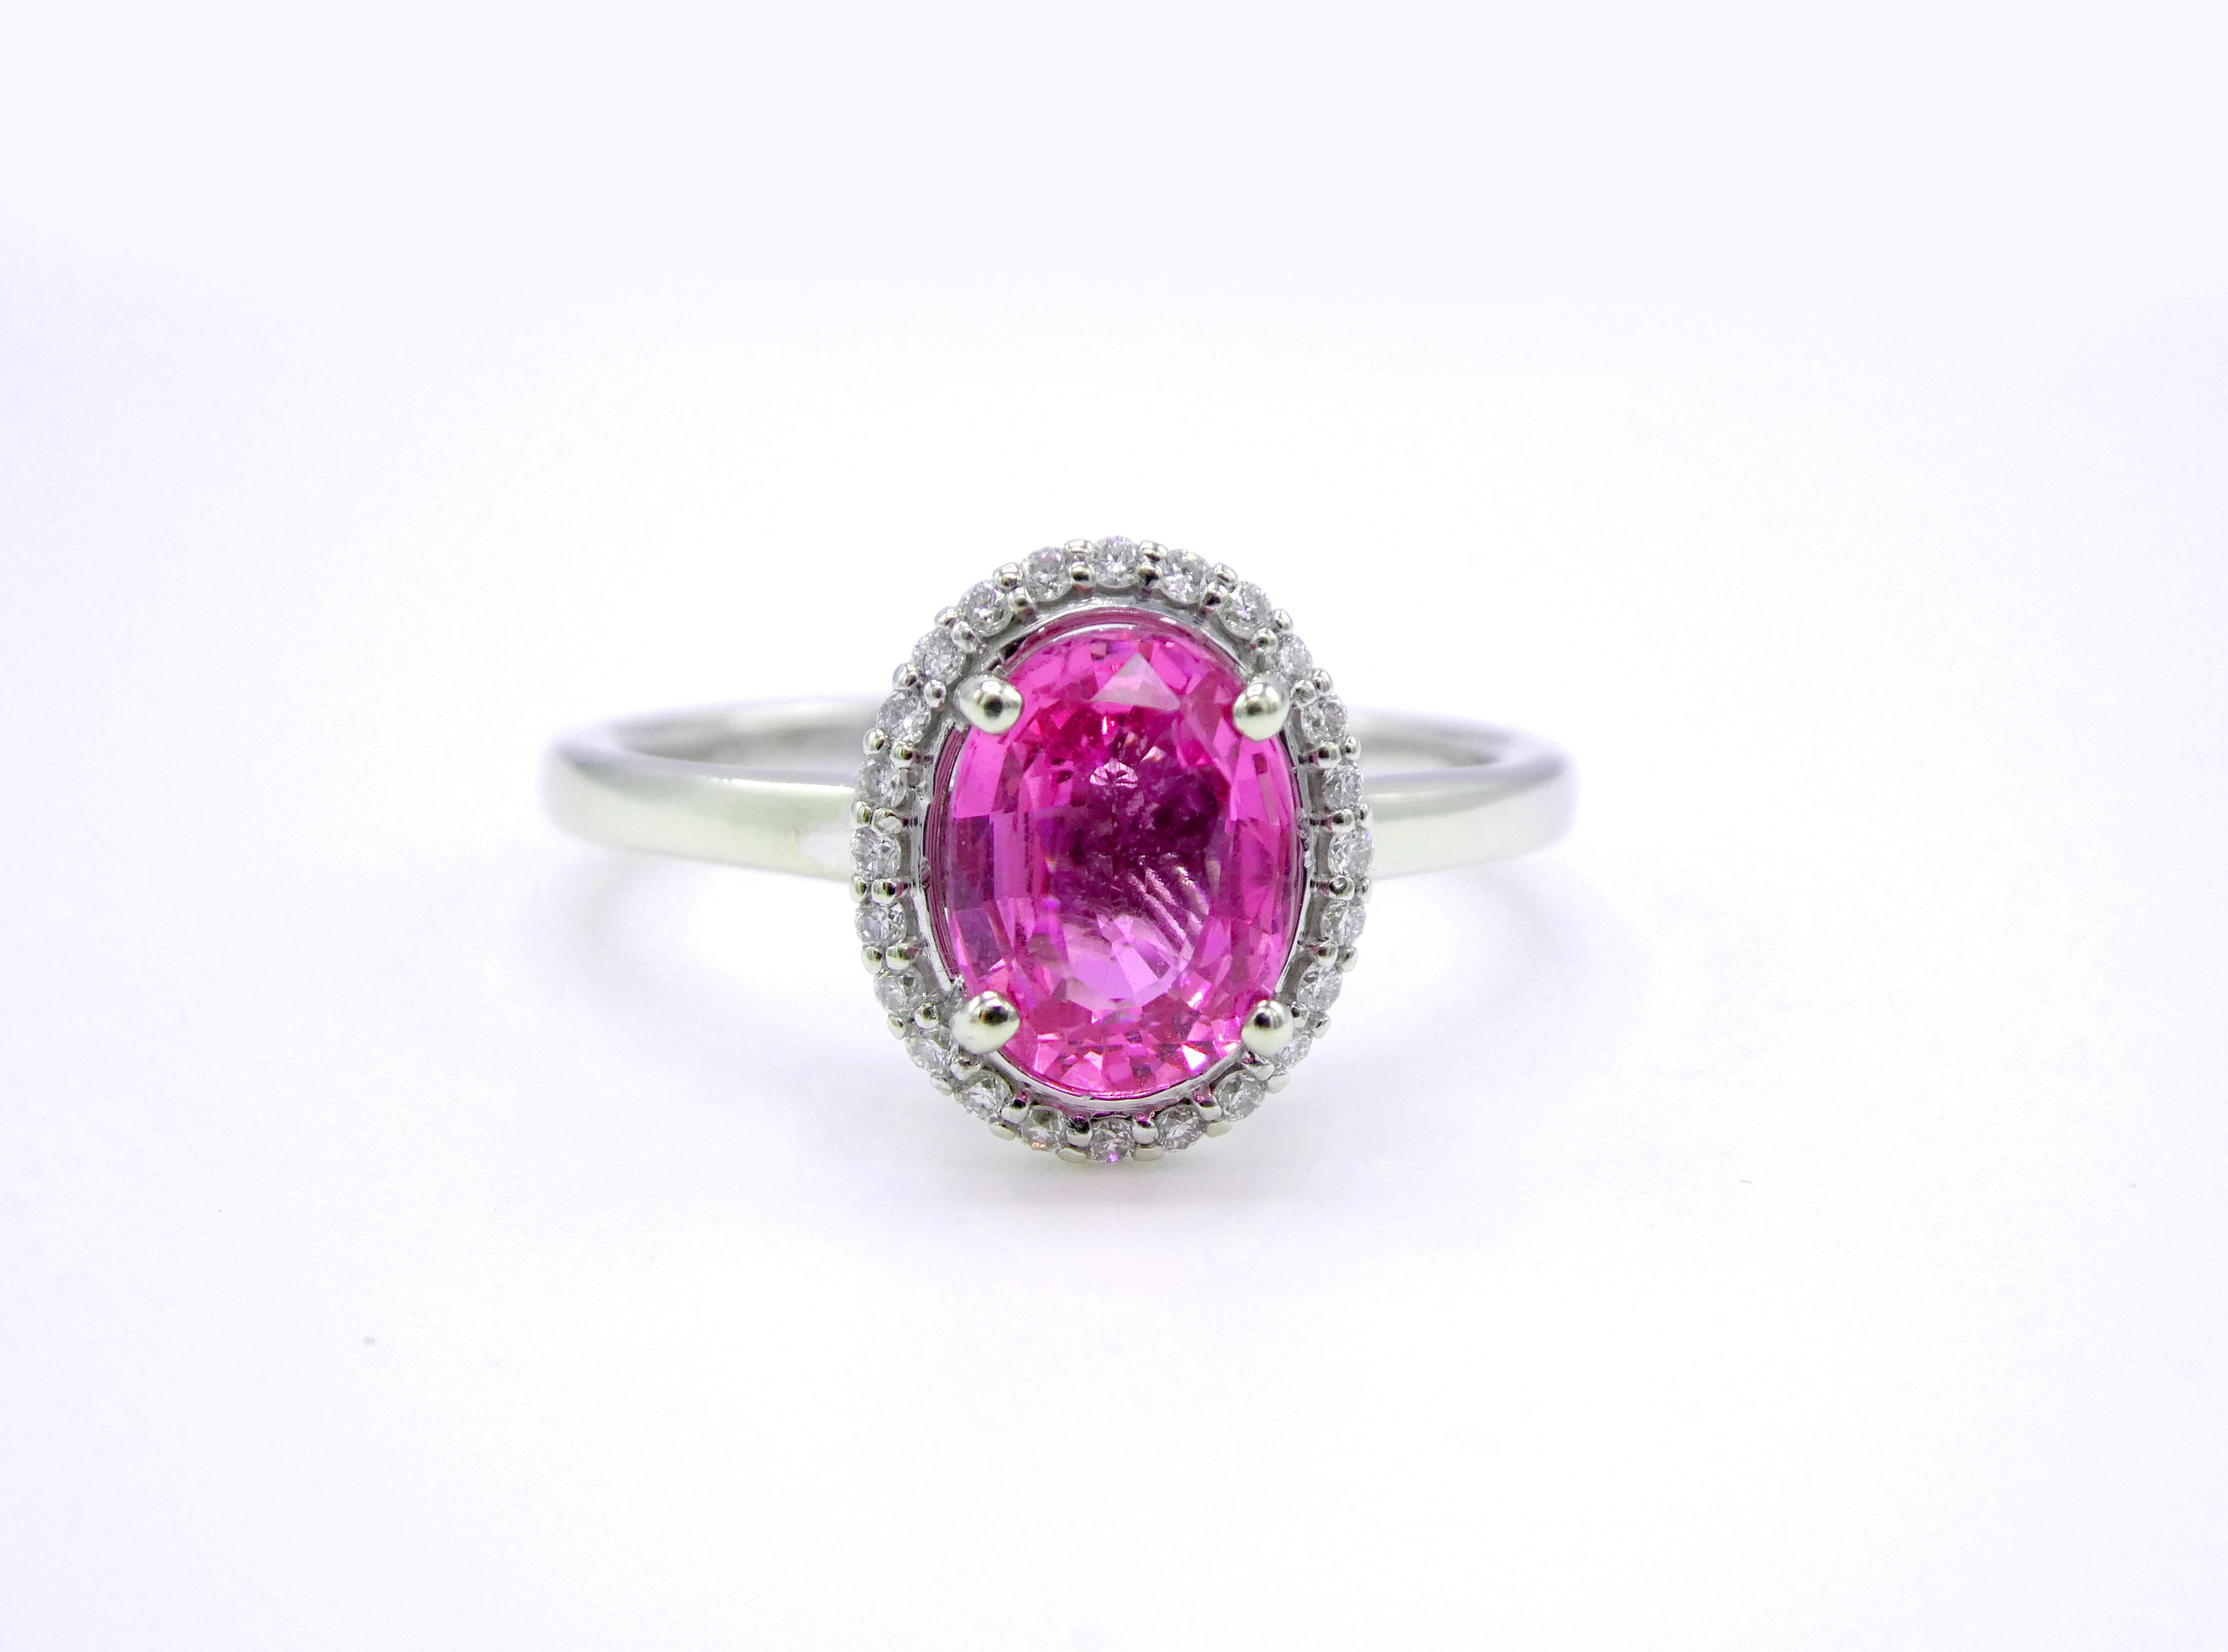 GIA Certified 1.49 Carat Oval Pink Sapphire  & Diamond Cocktail Ring 14K White Gold 

GIA certified natural pink sapphire (note original GIA Certificate pictured):
GIA Report Number: 1182327085
Shape: Oval
Weight: 1.49 carat
Cutting Style: Crown: